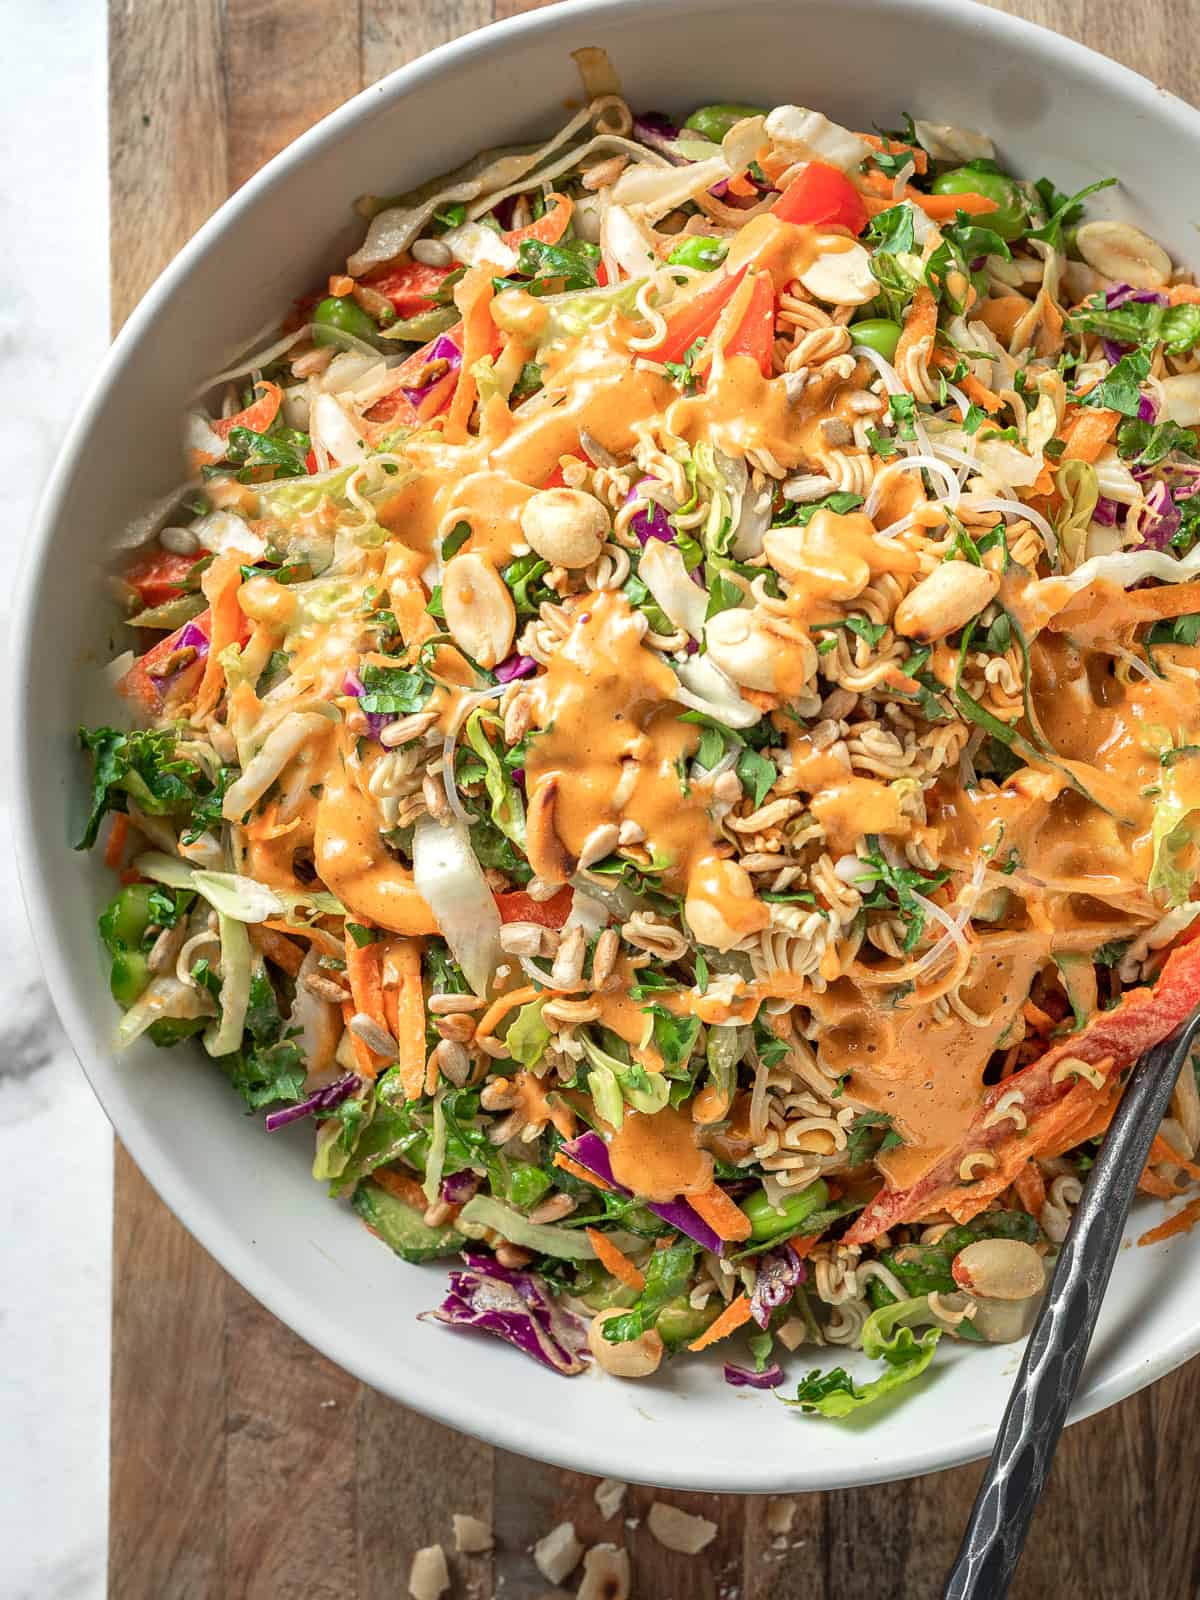 Thai shredded crunch salad in a bowl with spicy peanut sauce on top.